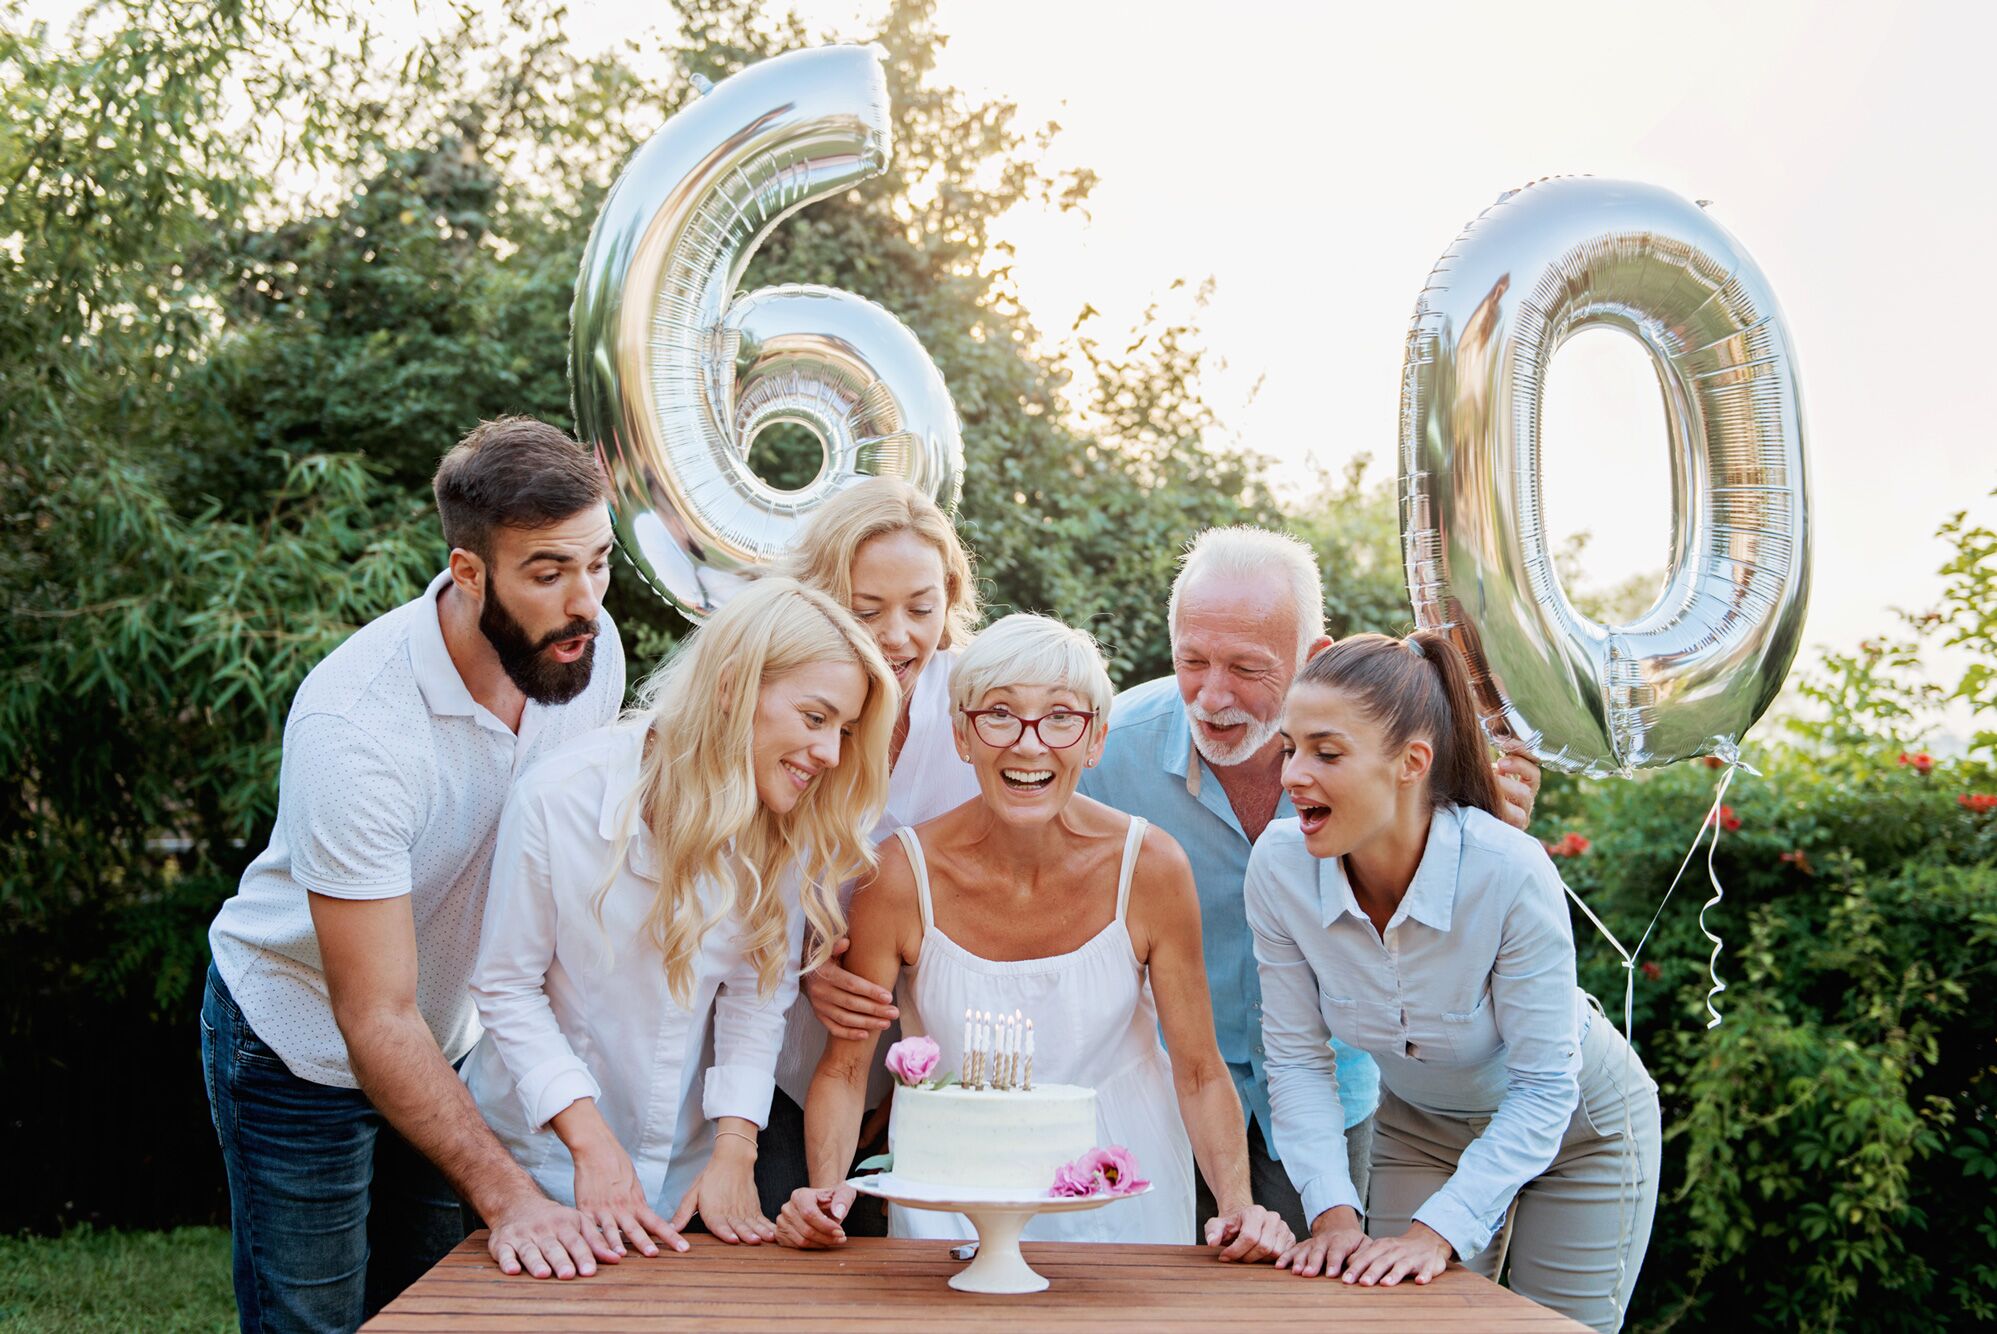 The Best 60th Birthday Ideas & Party Themes - The Bash